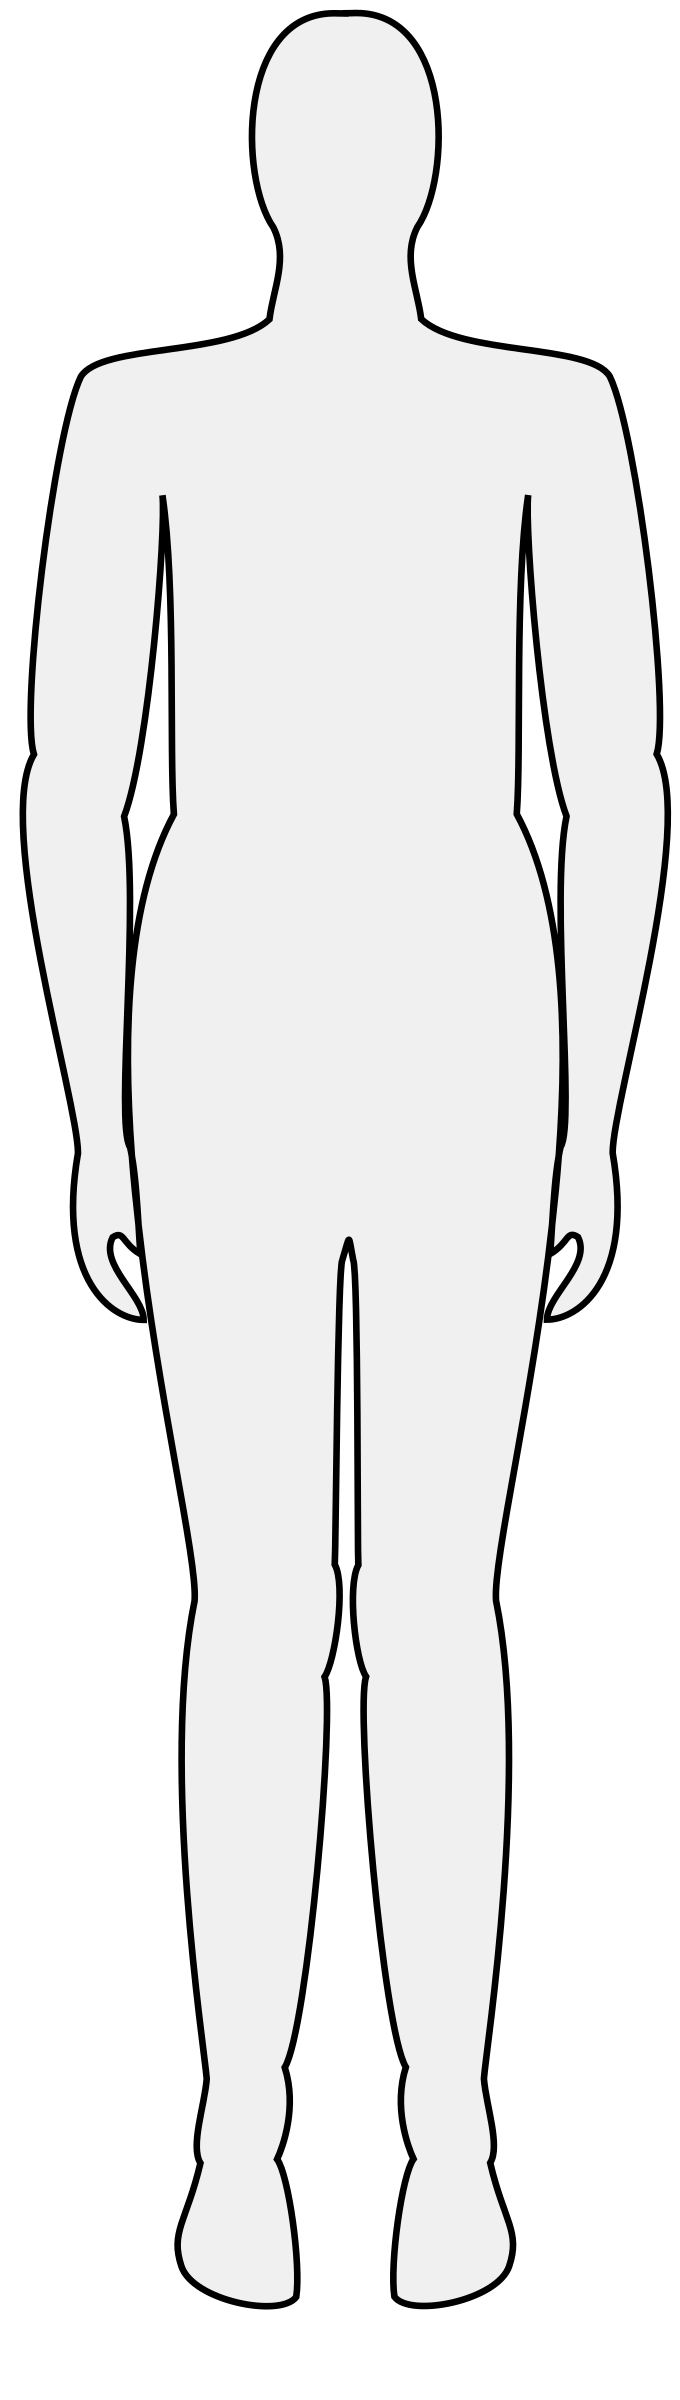 clipart human body outline - photo #32